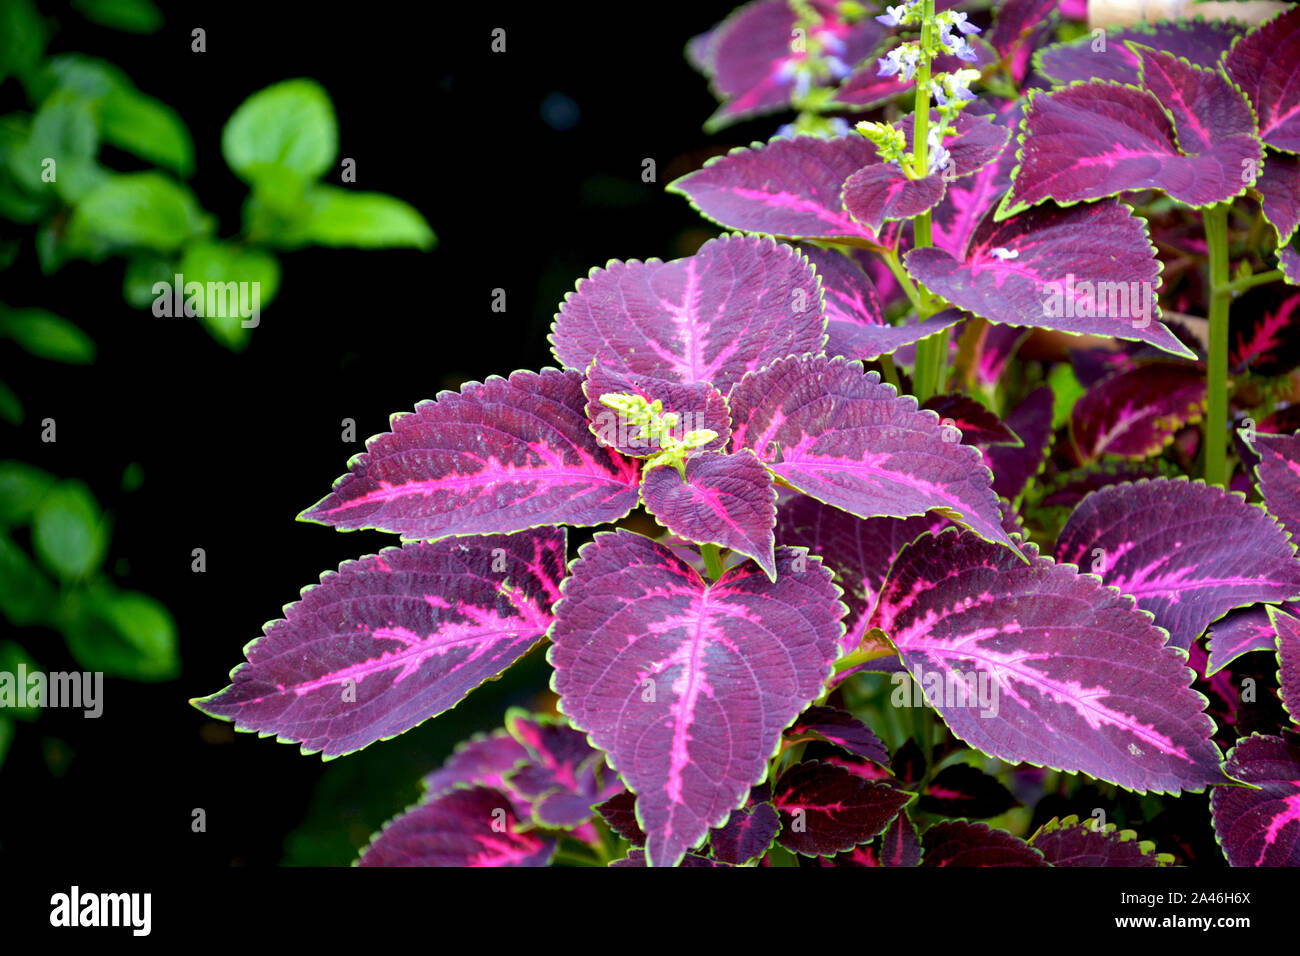 Close up of Coleus ( Plectranthus scutellarioides ) plant leaves growing in mawlynnong village of Shillong, Meghalaya, India Stock Photo